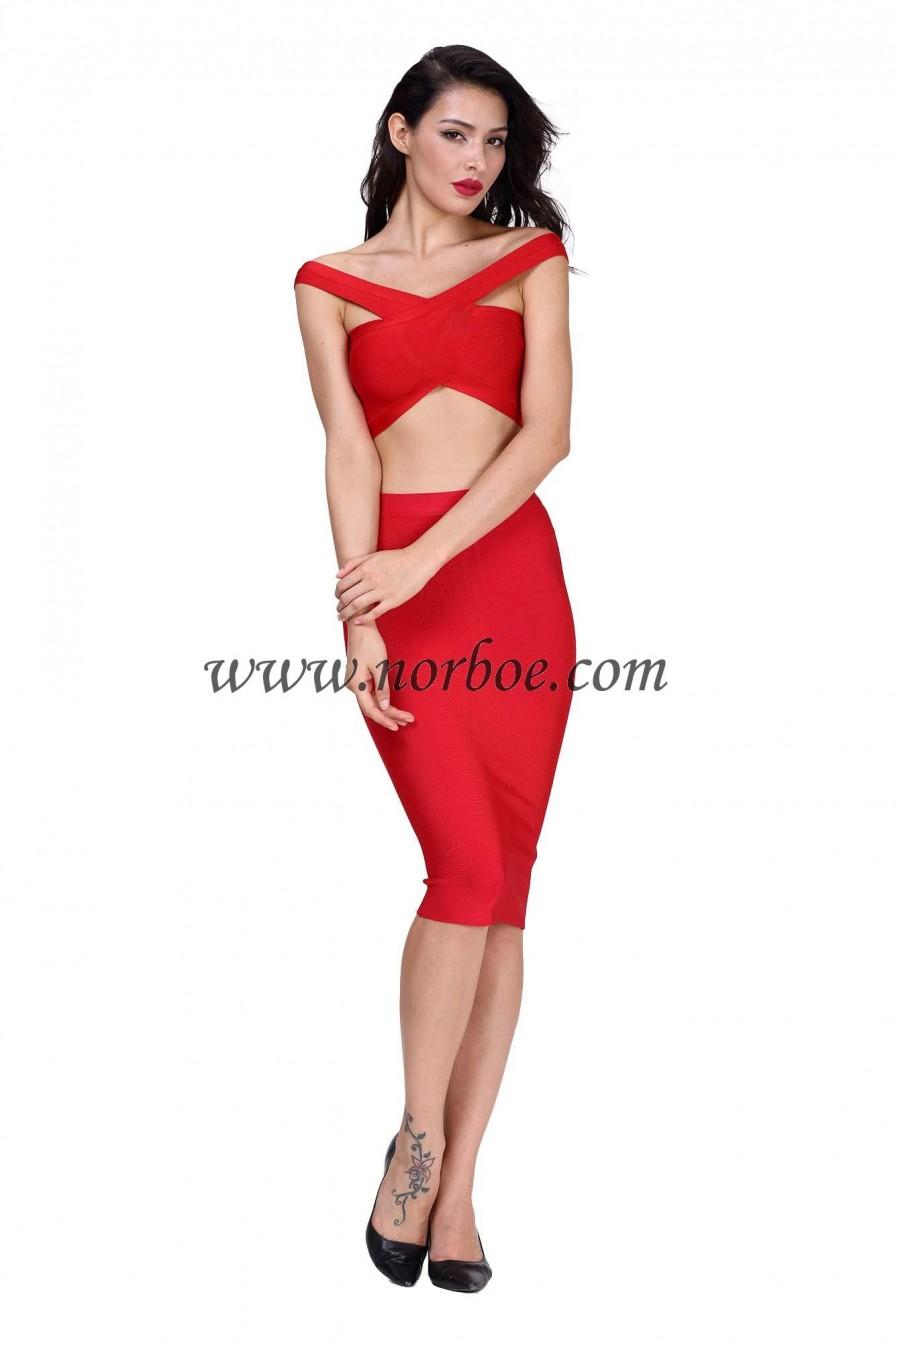 Mariage - Norboe The Celebrity Red Bandage Dress